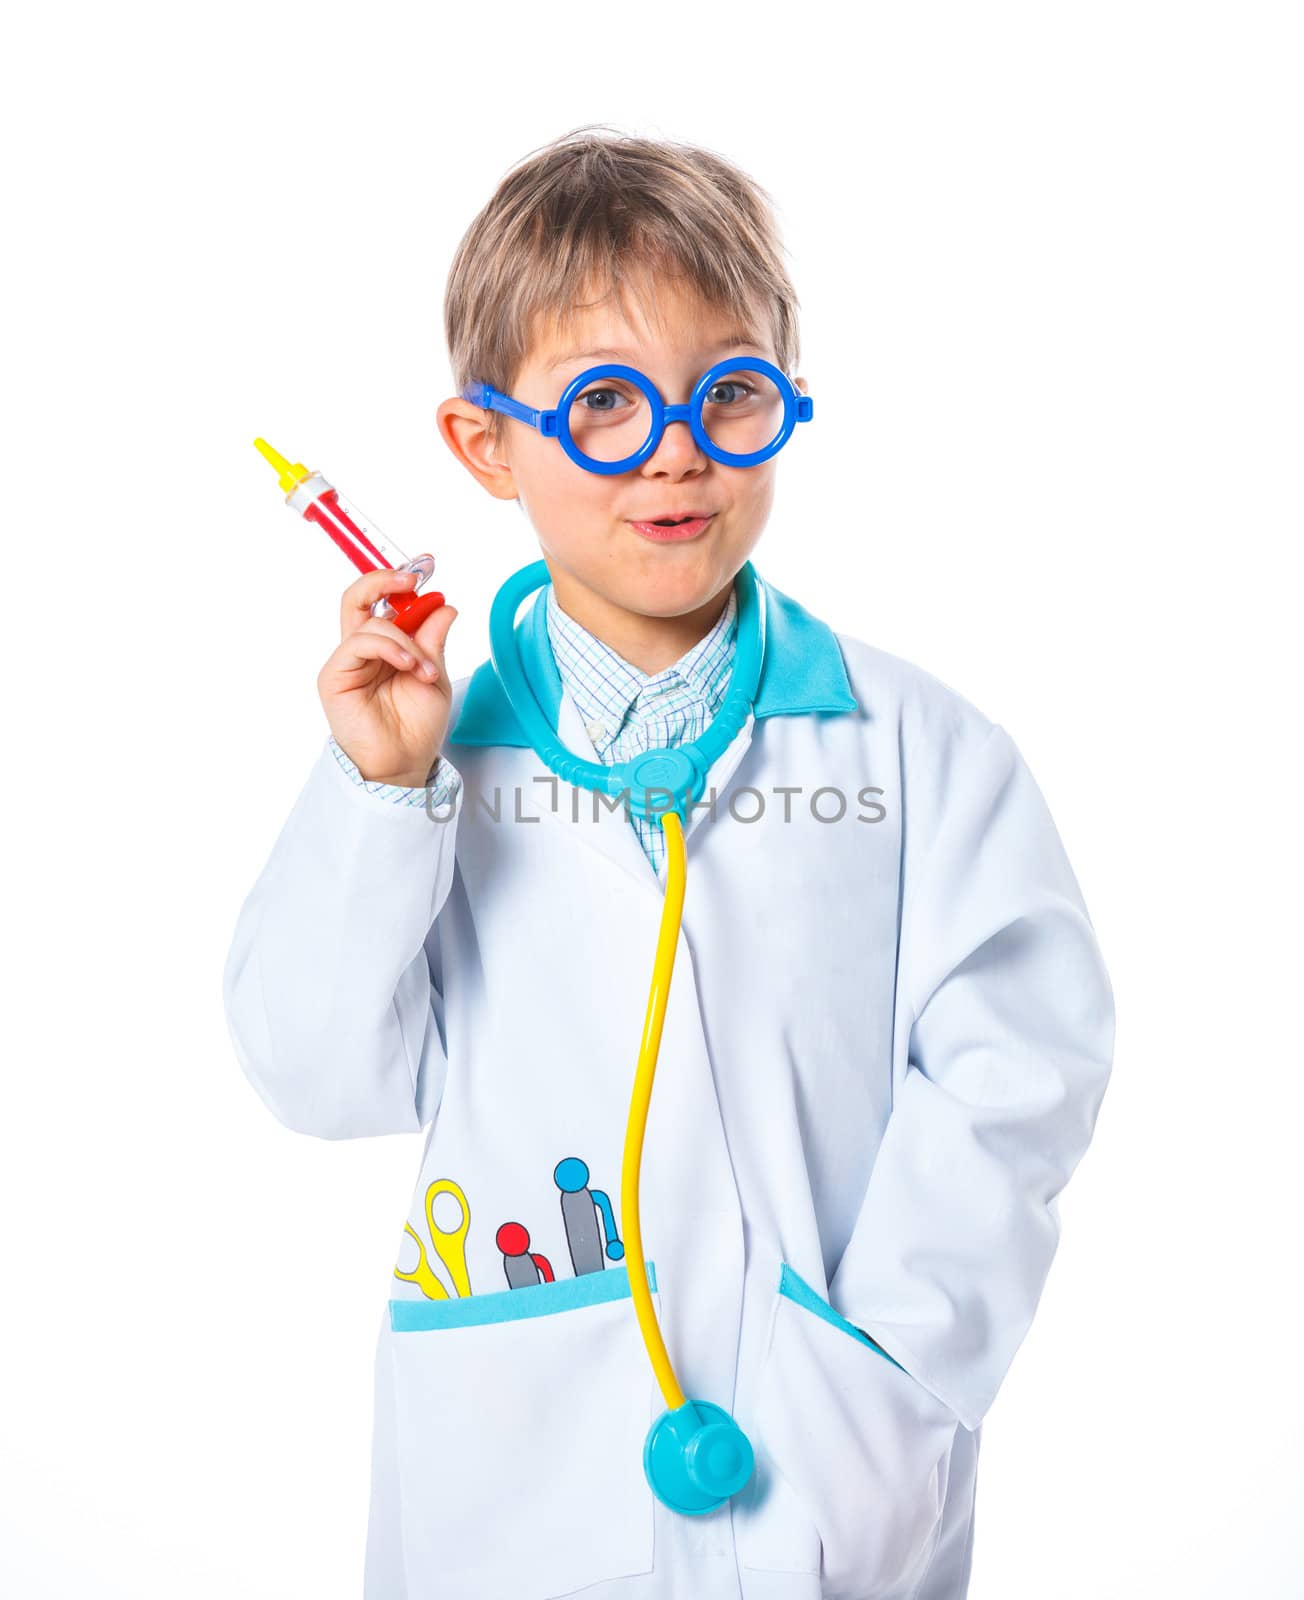 Portrait of a little smiling doctor with stethoscope and syringe. Isolated on white background